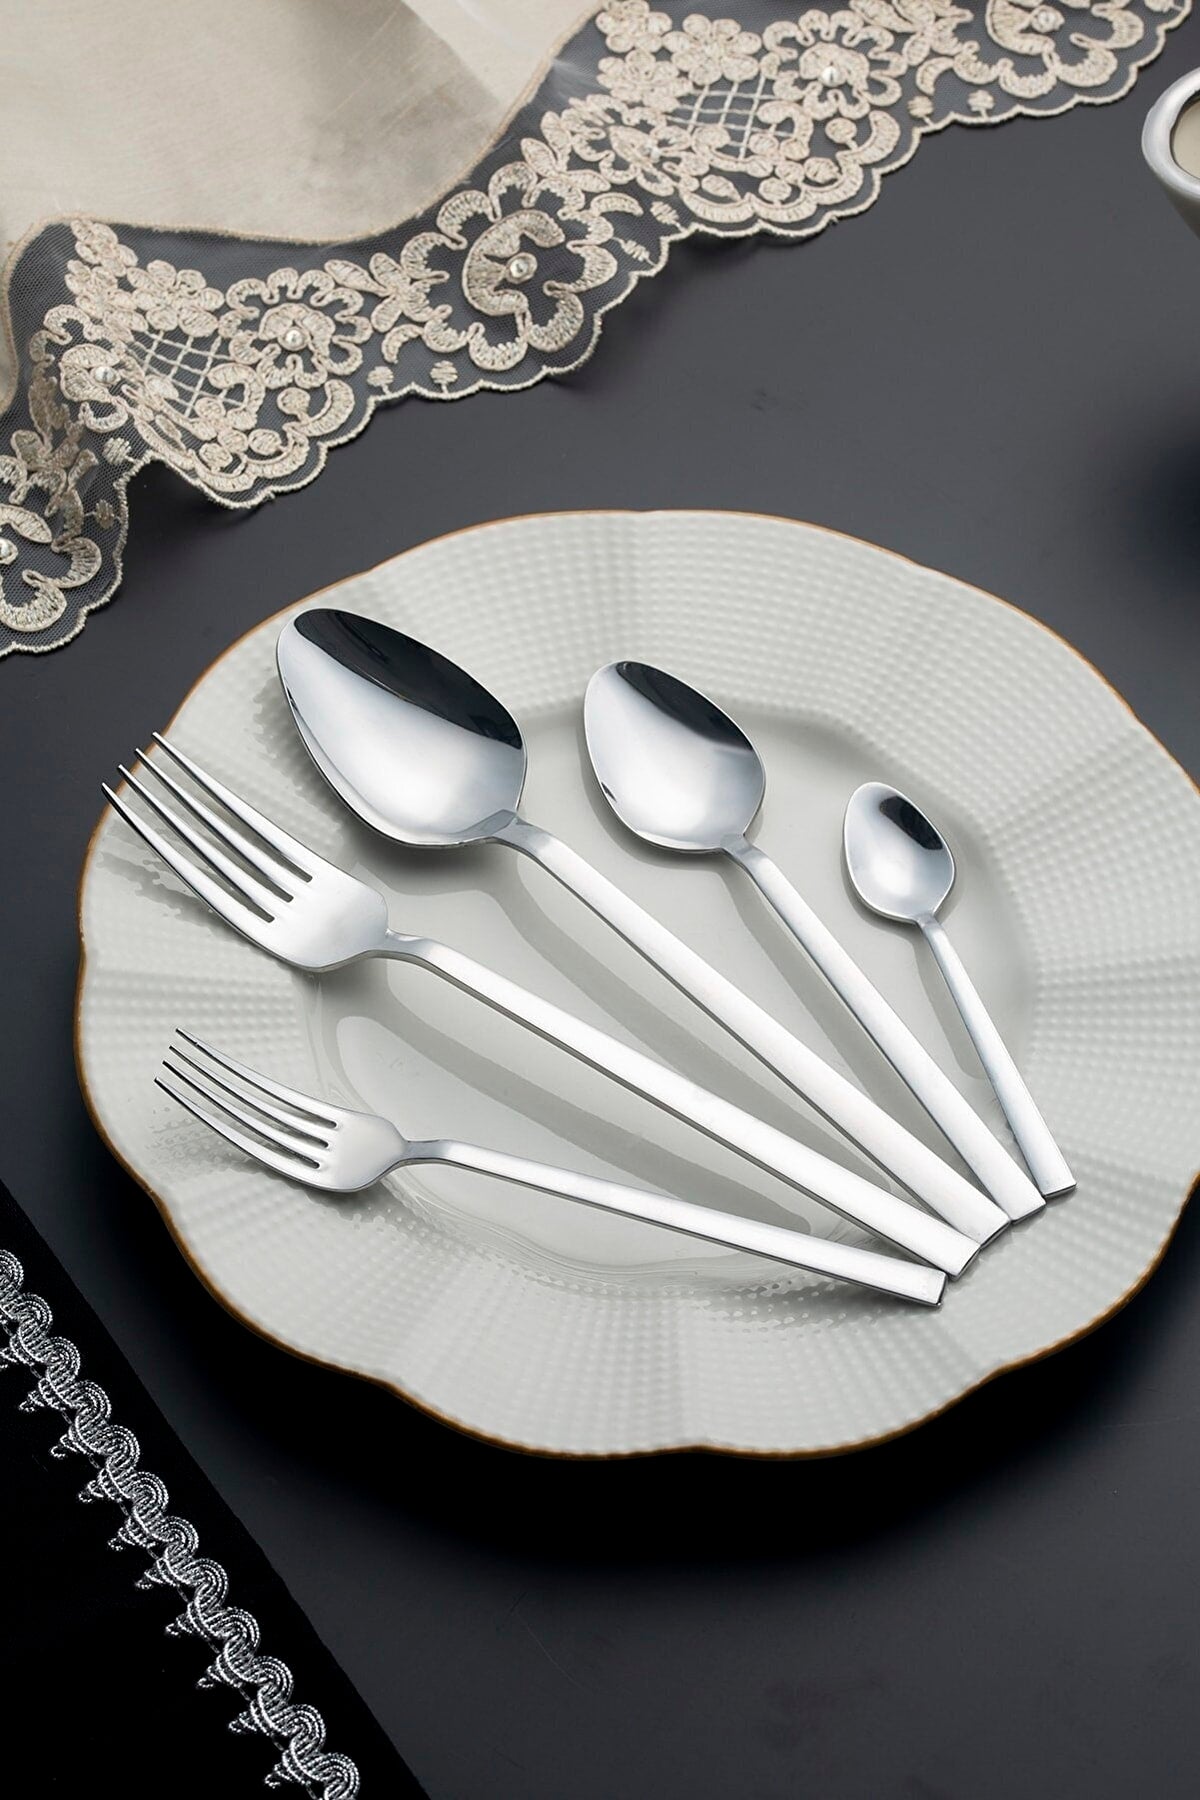 Stainless Steel 18/10 Quality 30 Piece Natural Cutlery Set for 6 Persons Straight Model